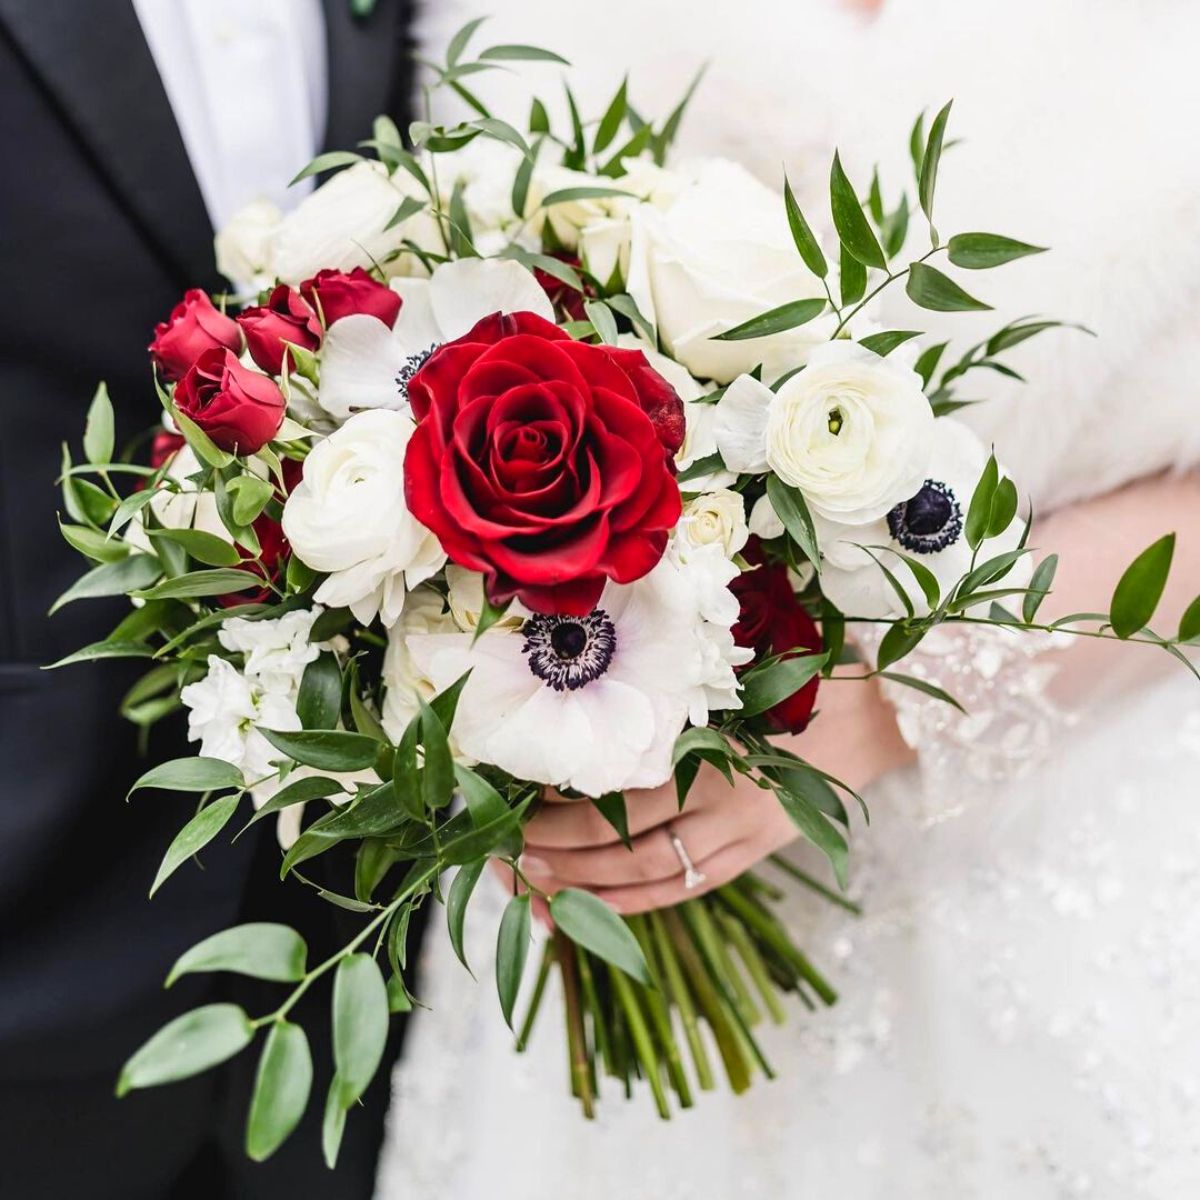 Christmas wedding bouquet with red roses and white anemones